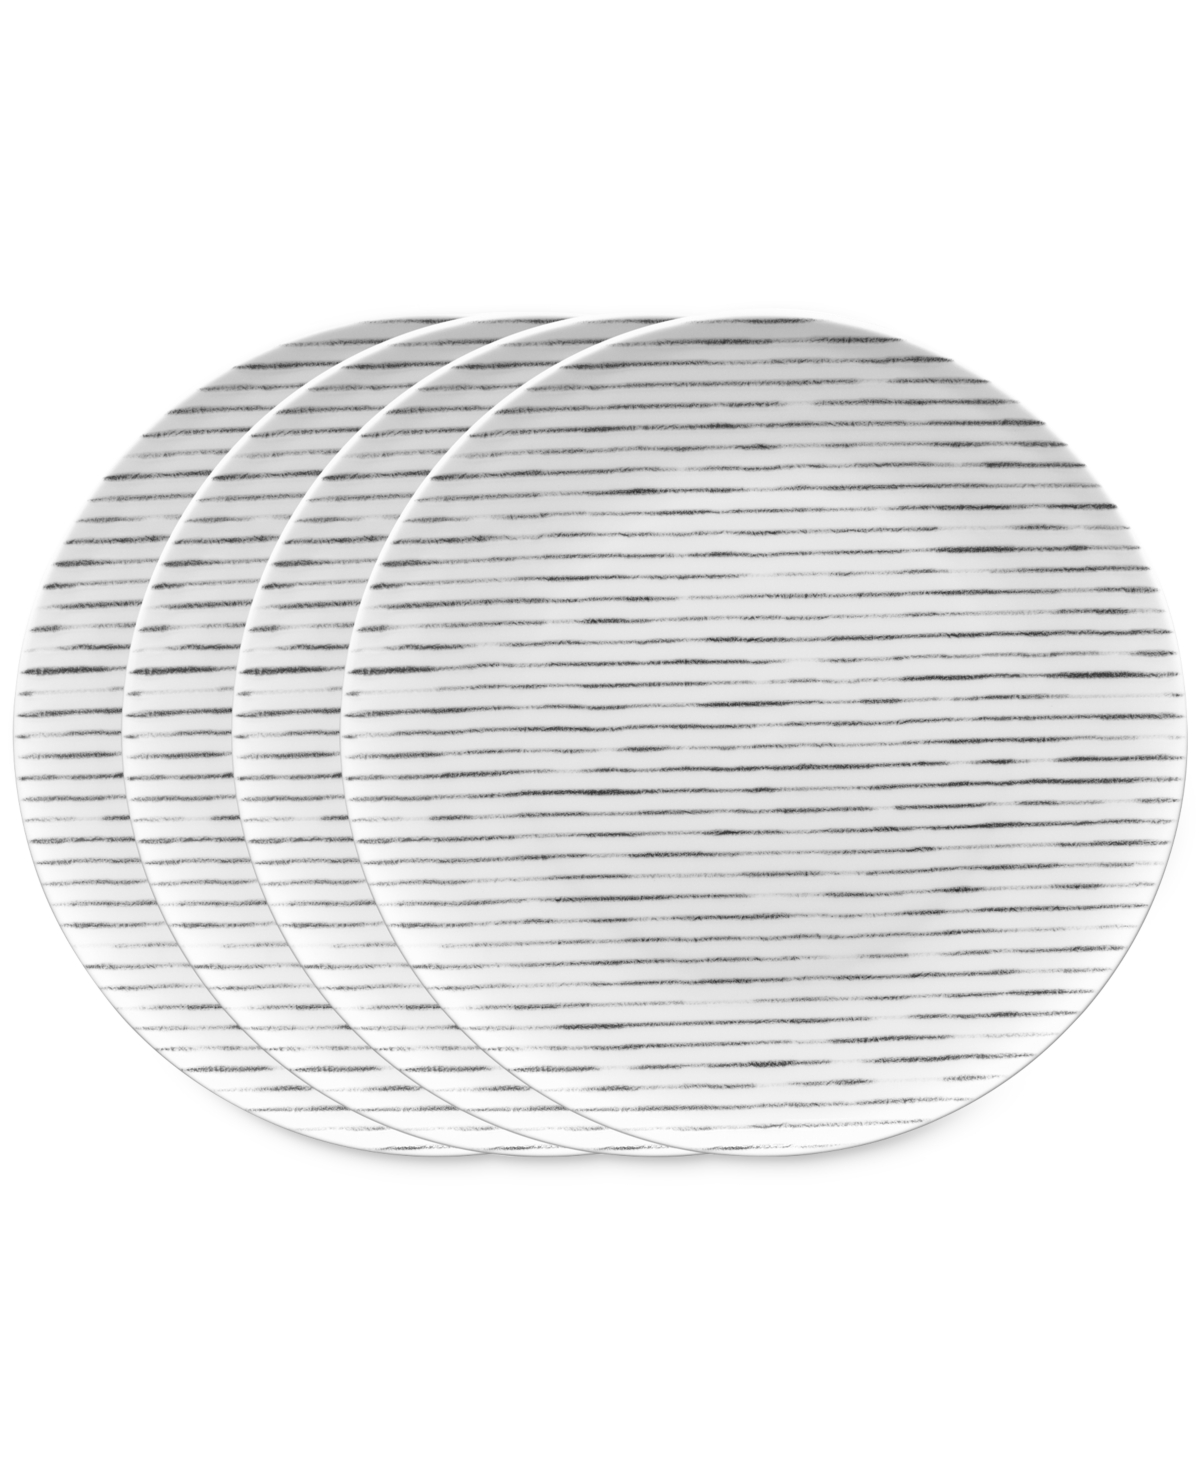 Hammock Stripes Coupe Dinner Plates, Set of 4 - Green